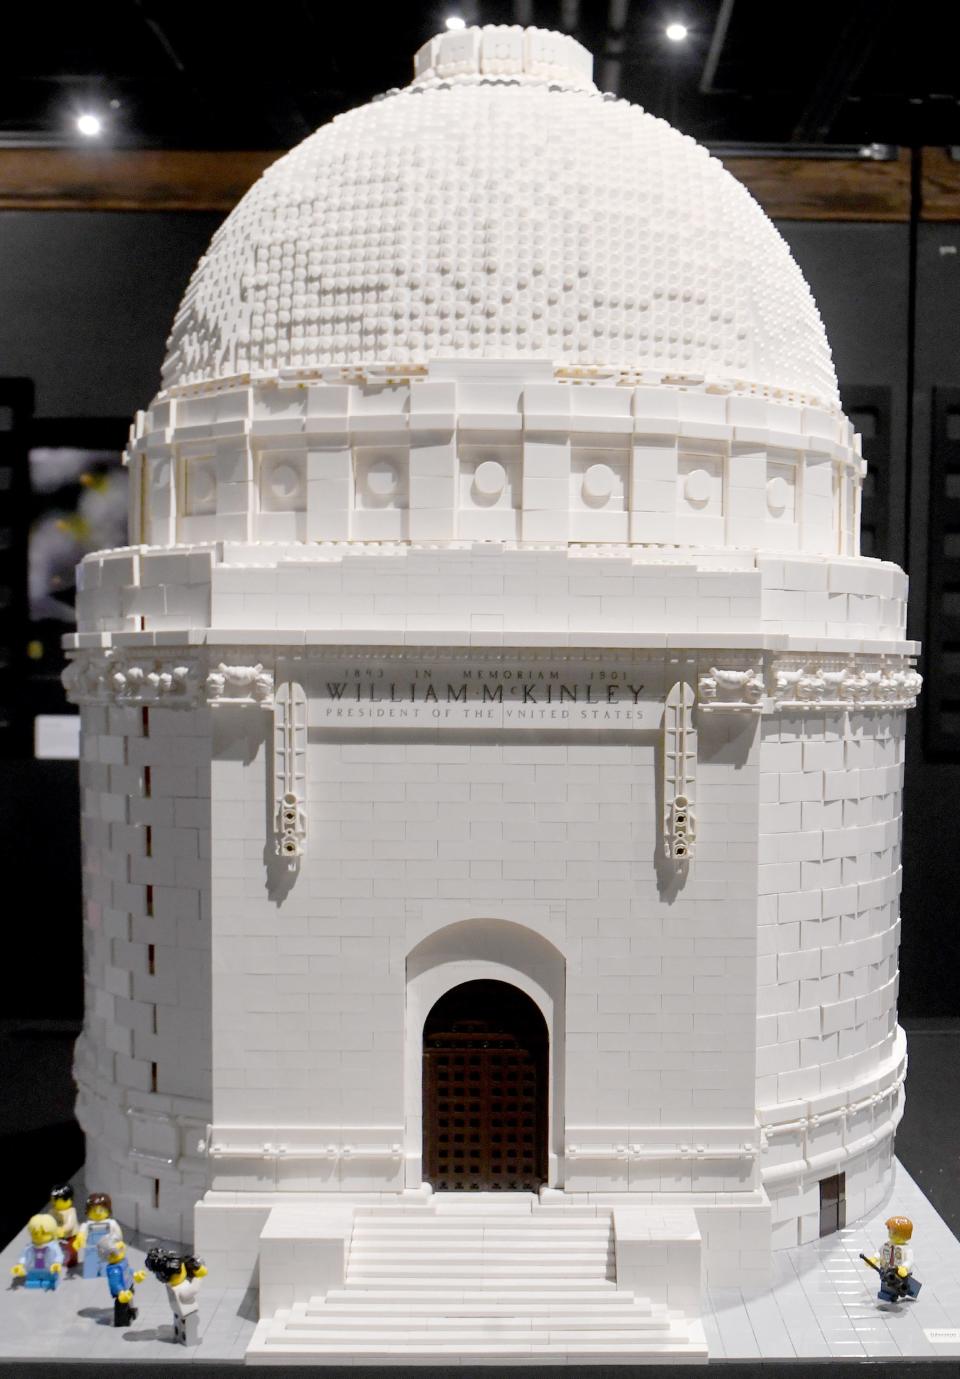 This replica McKinley National Memorial was constructed using roughly 50,000 Legos. The model, created by Warren Elsmore, is part of a new Lego exhibit at the McKinley Presidential Library & Museum in Canton.